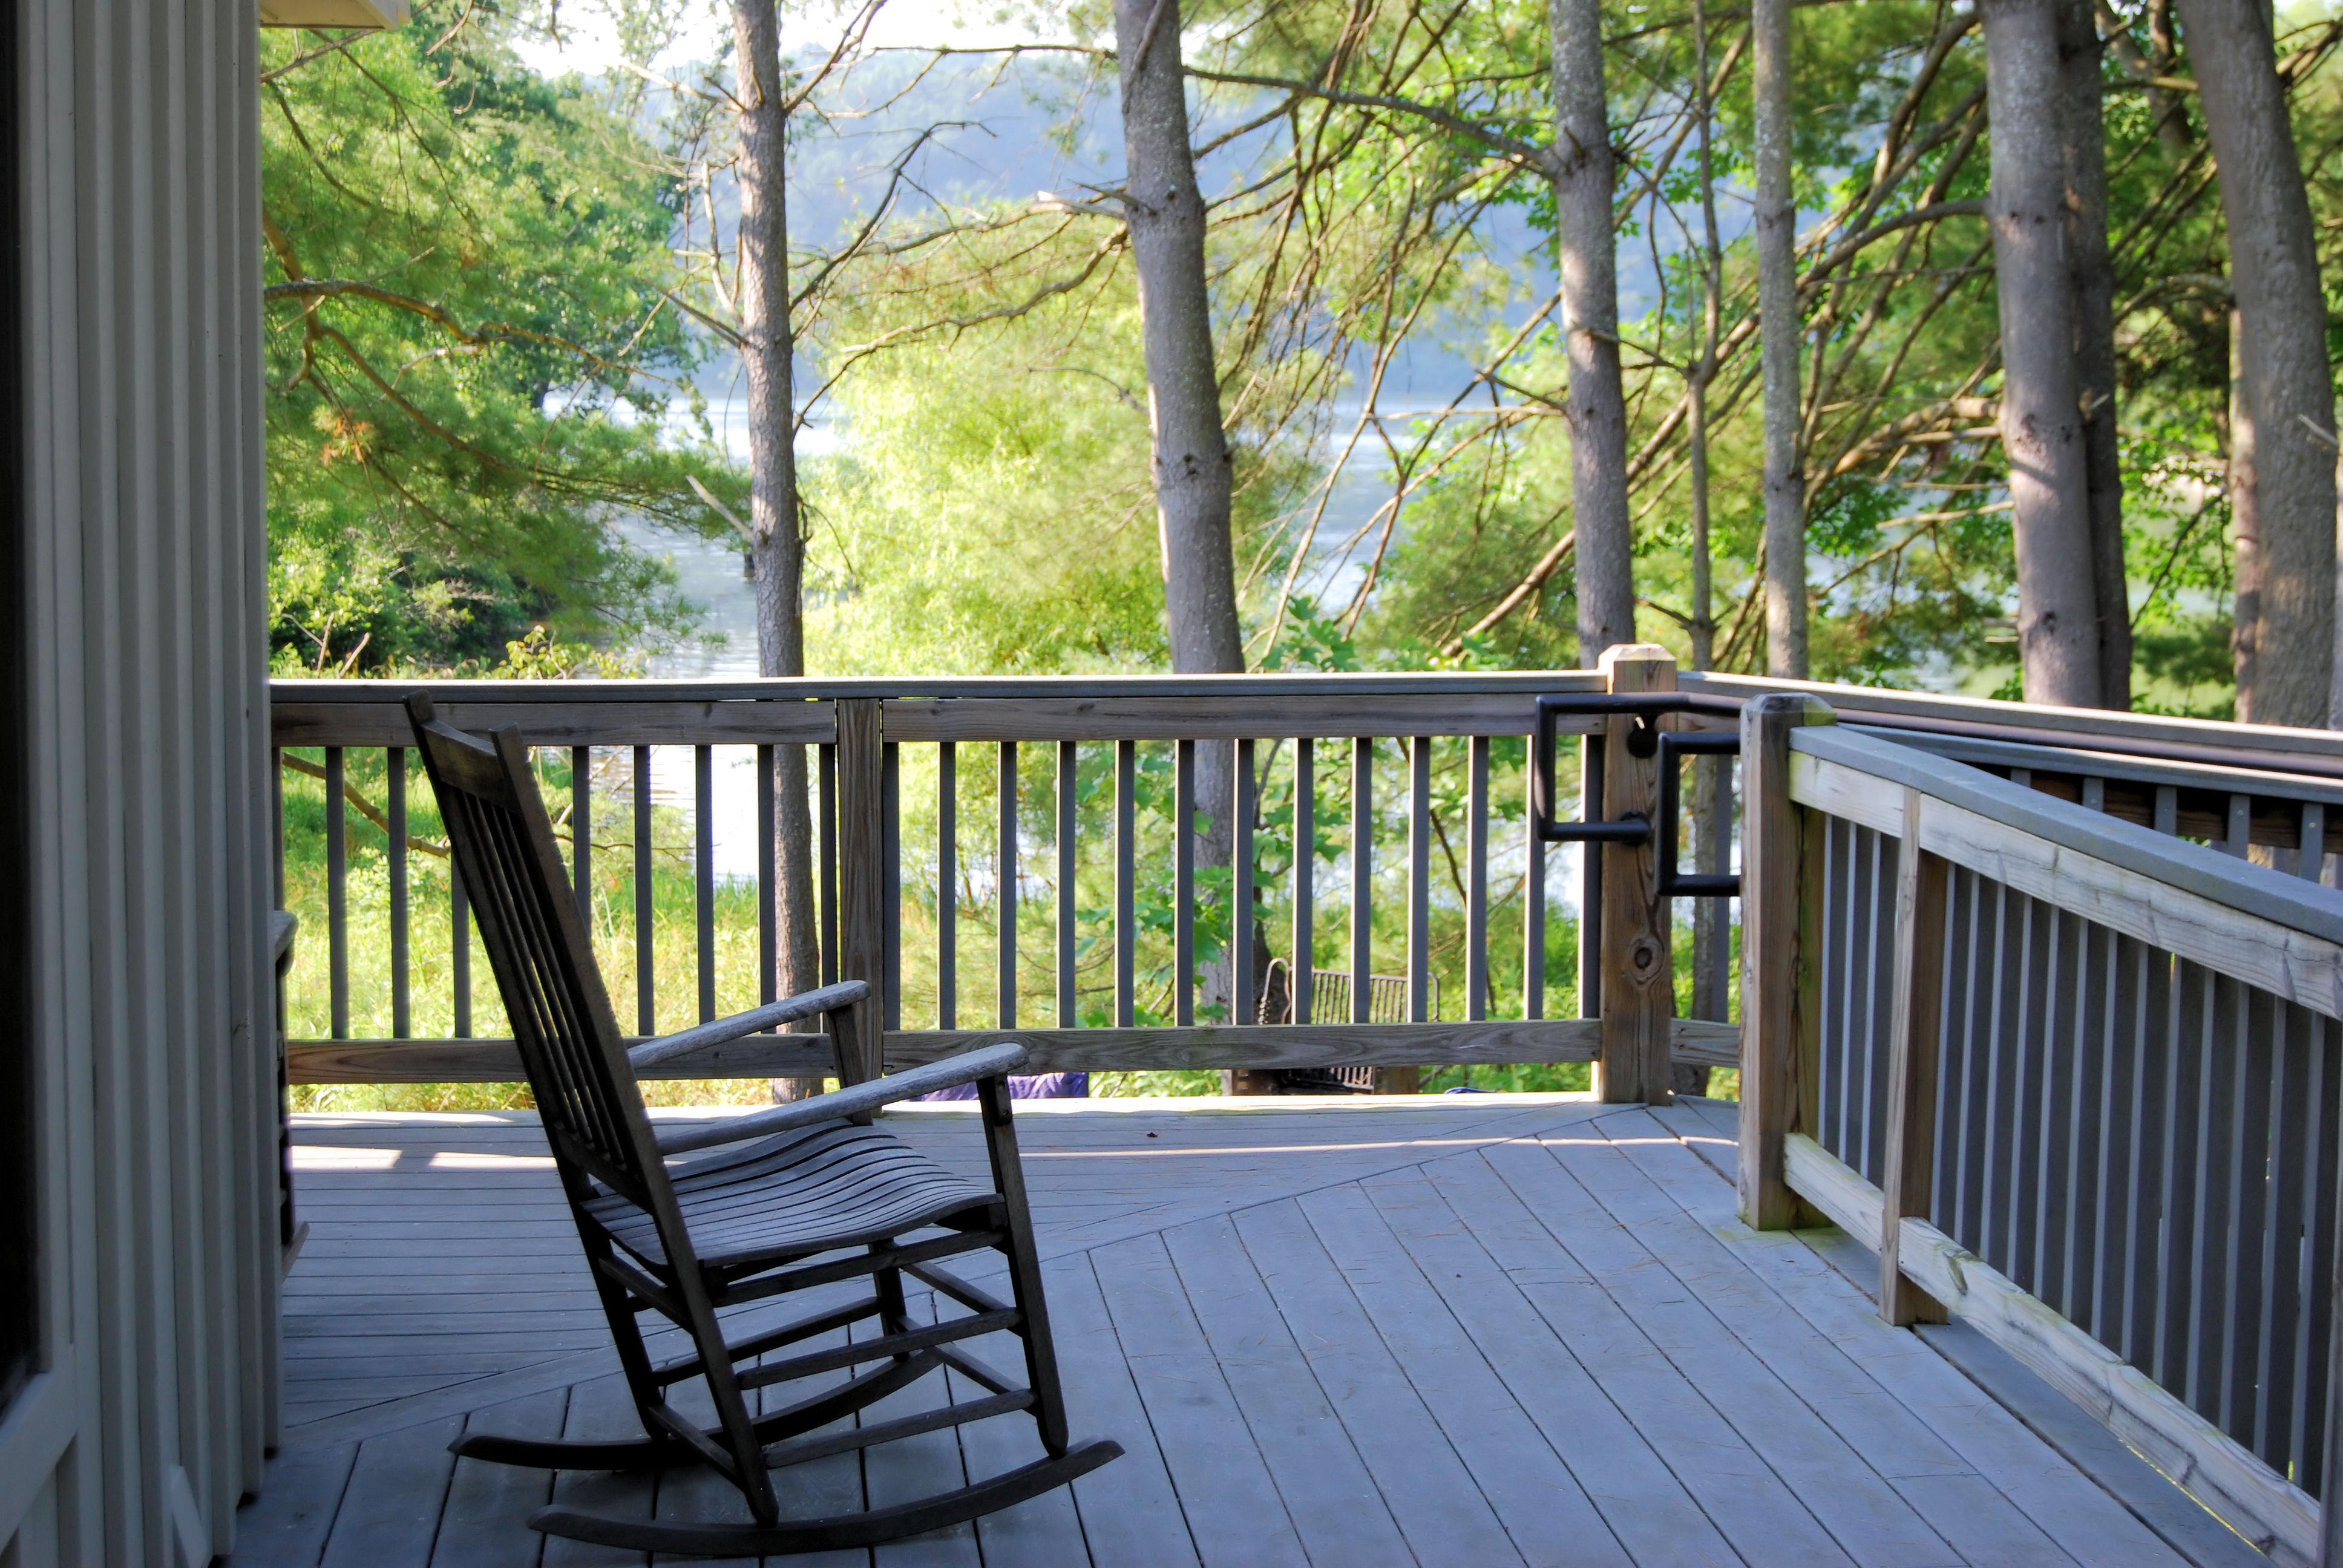 Claytor_Lake_State_Park_in_June_-_cabin_13_porch_view_(7469561194).jpg